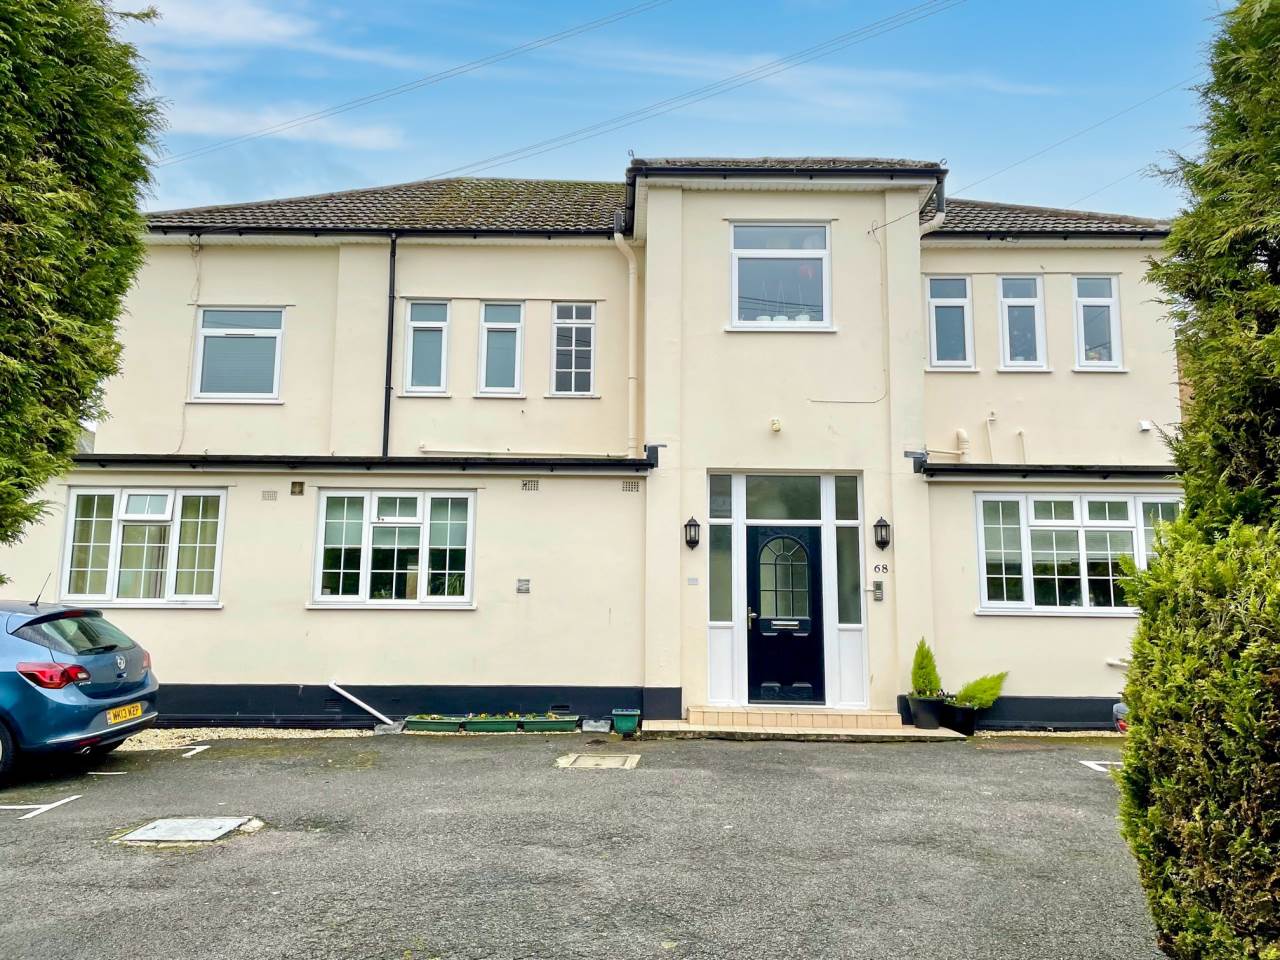 AVAILABLE SOON!! NO CHAIN*ONE BEDROOM GROUND FLOOR APARTMENT WITH PRIVATE ENTRANCE* 142 YEAR LEASE* MODERN KITCHEN* ALLOCATED PARKING* IDEAL BUY TO LET